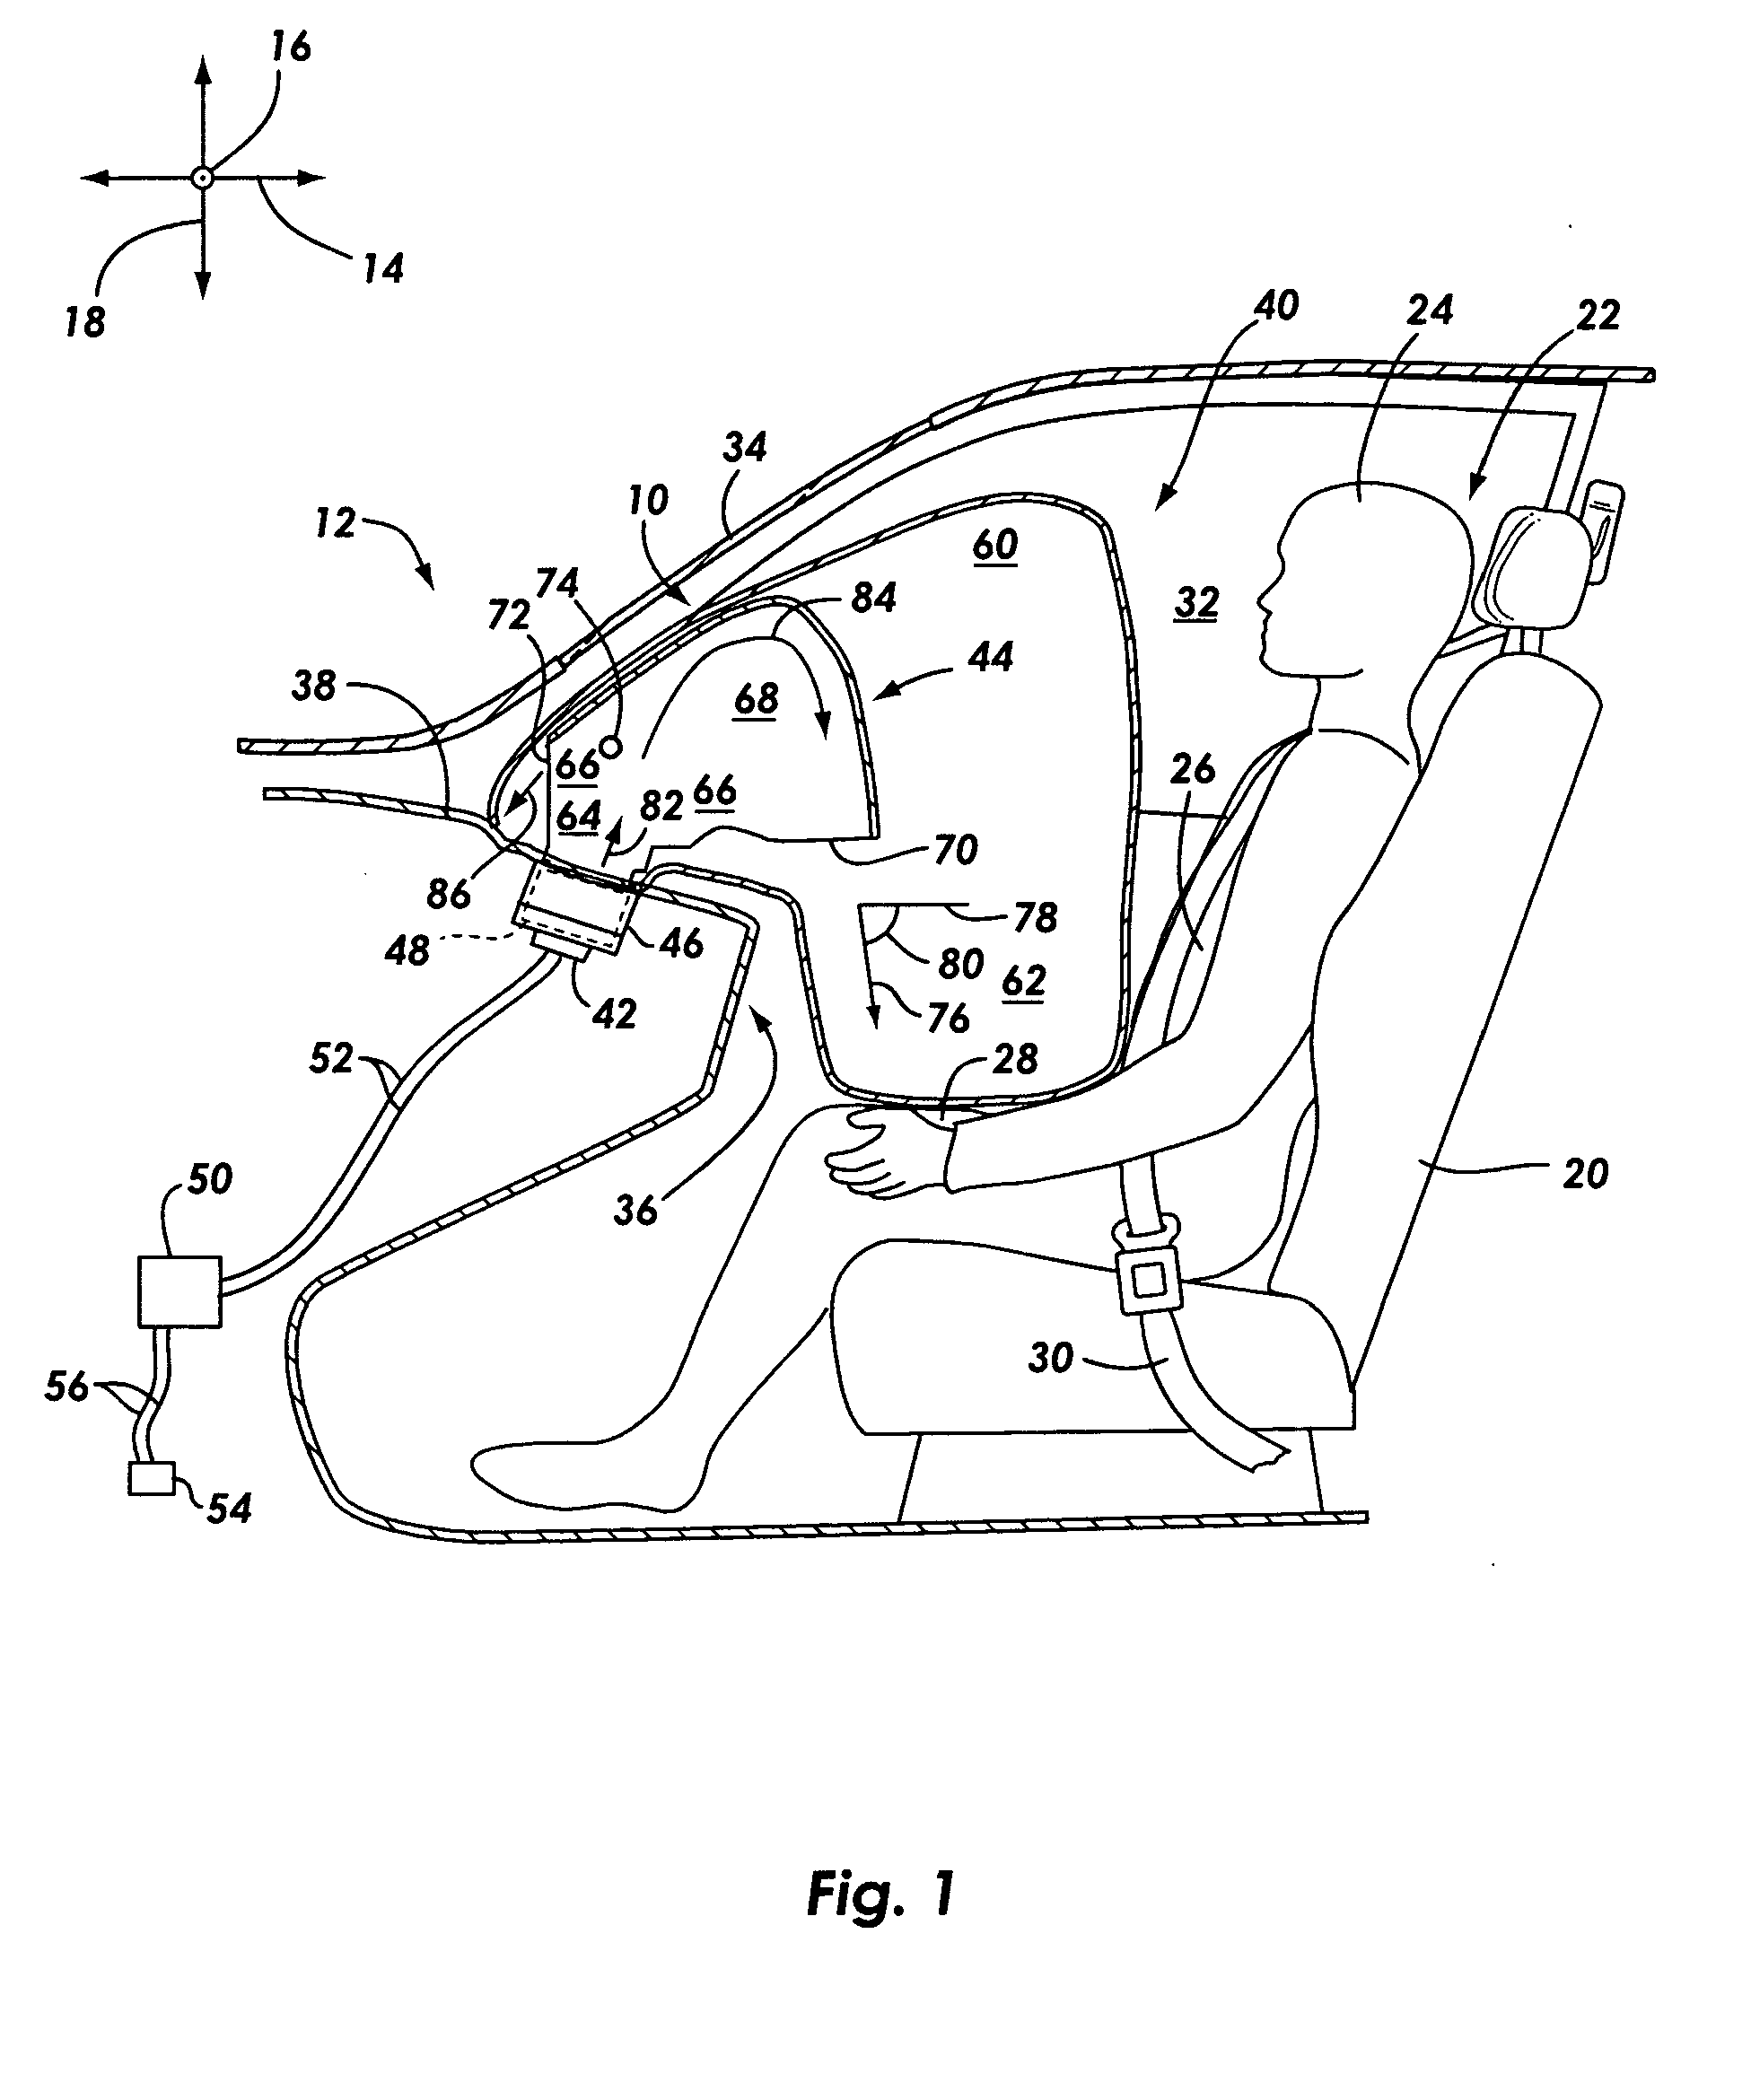 Gas flow deflection apparatus and method for airbag systems